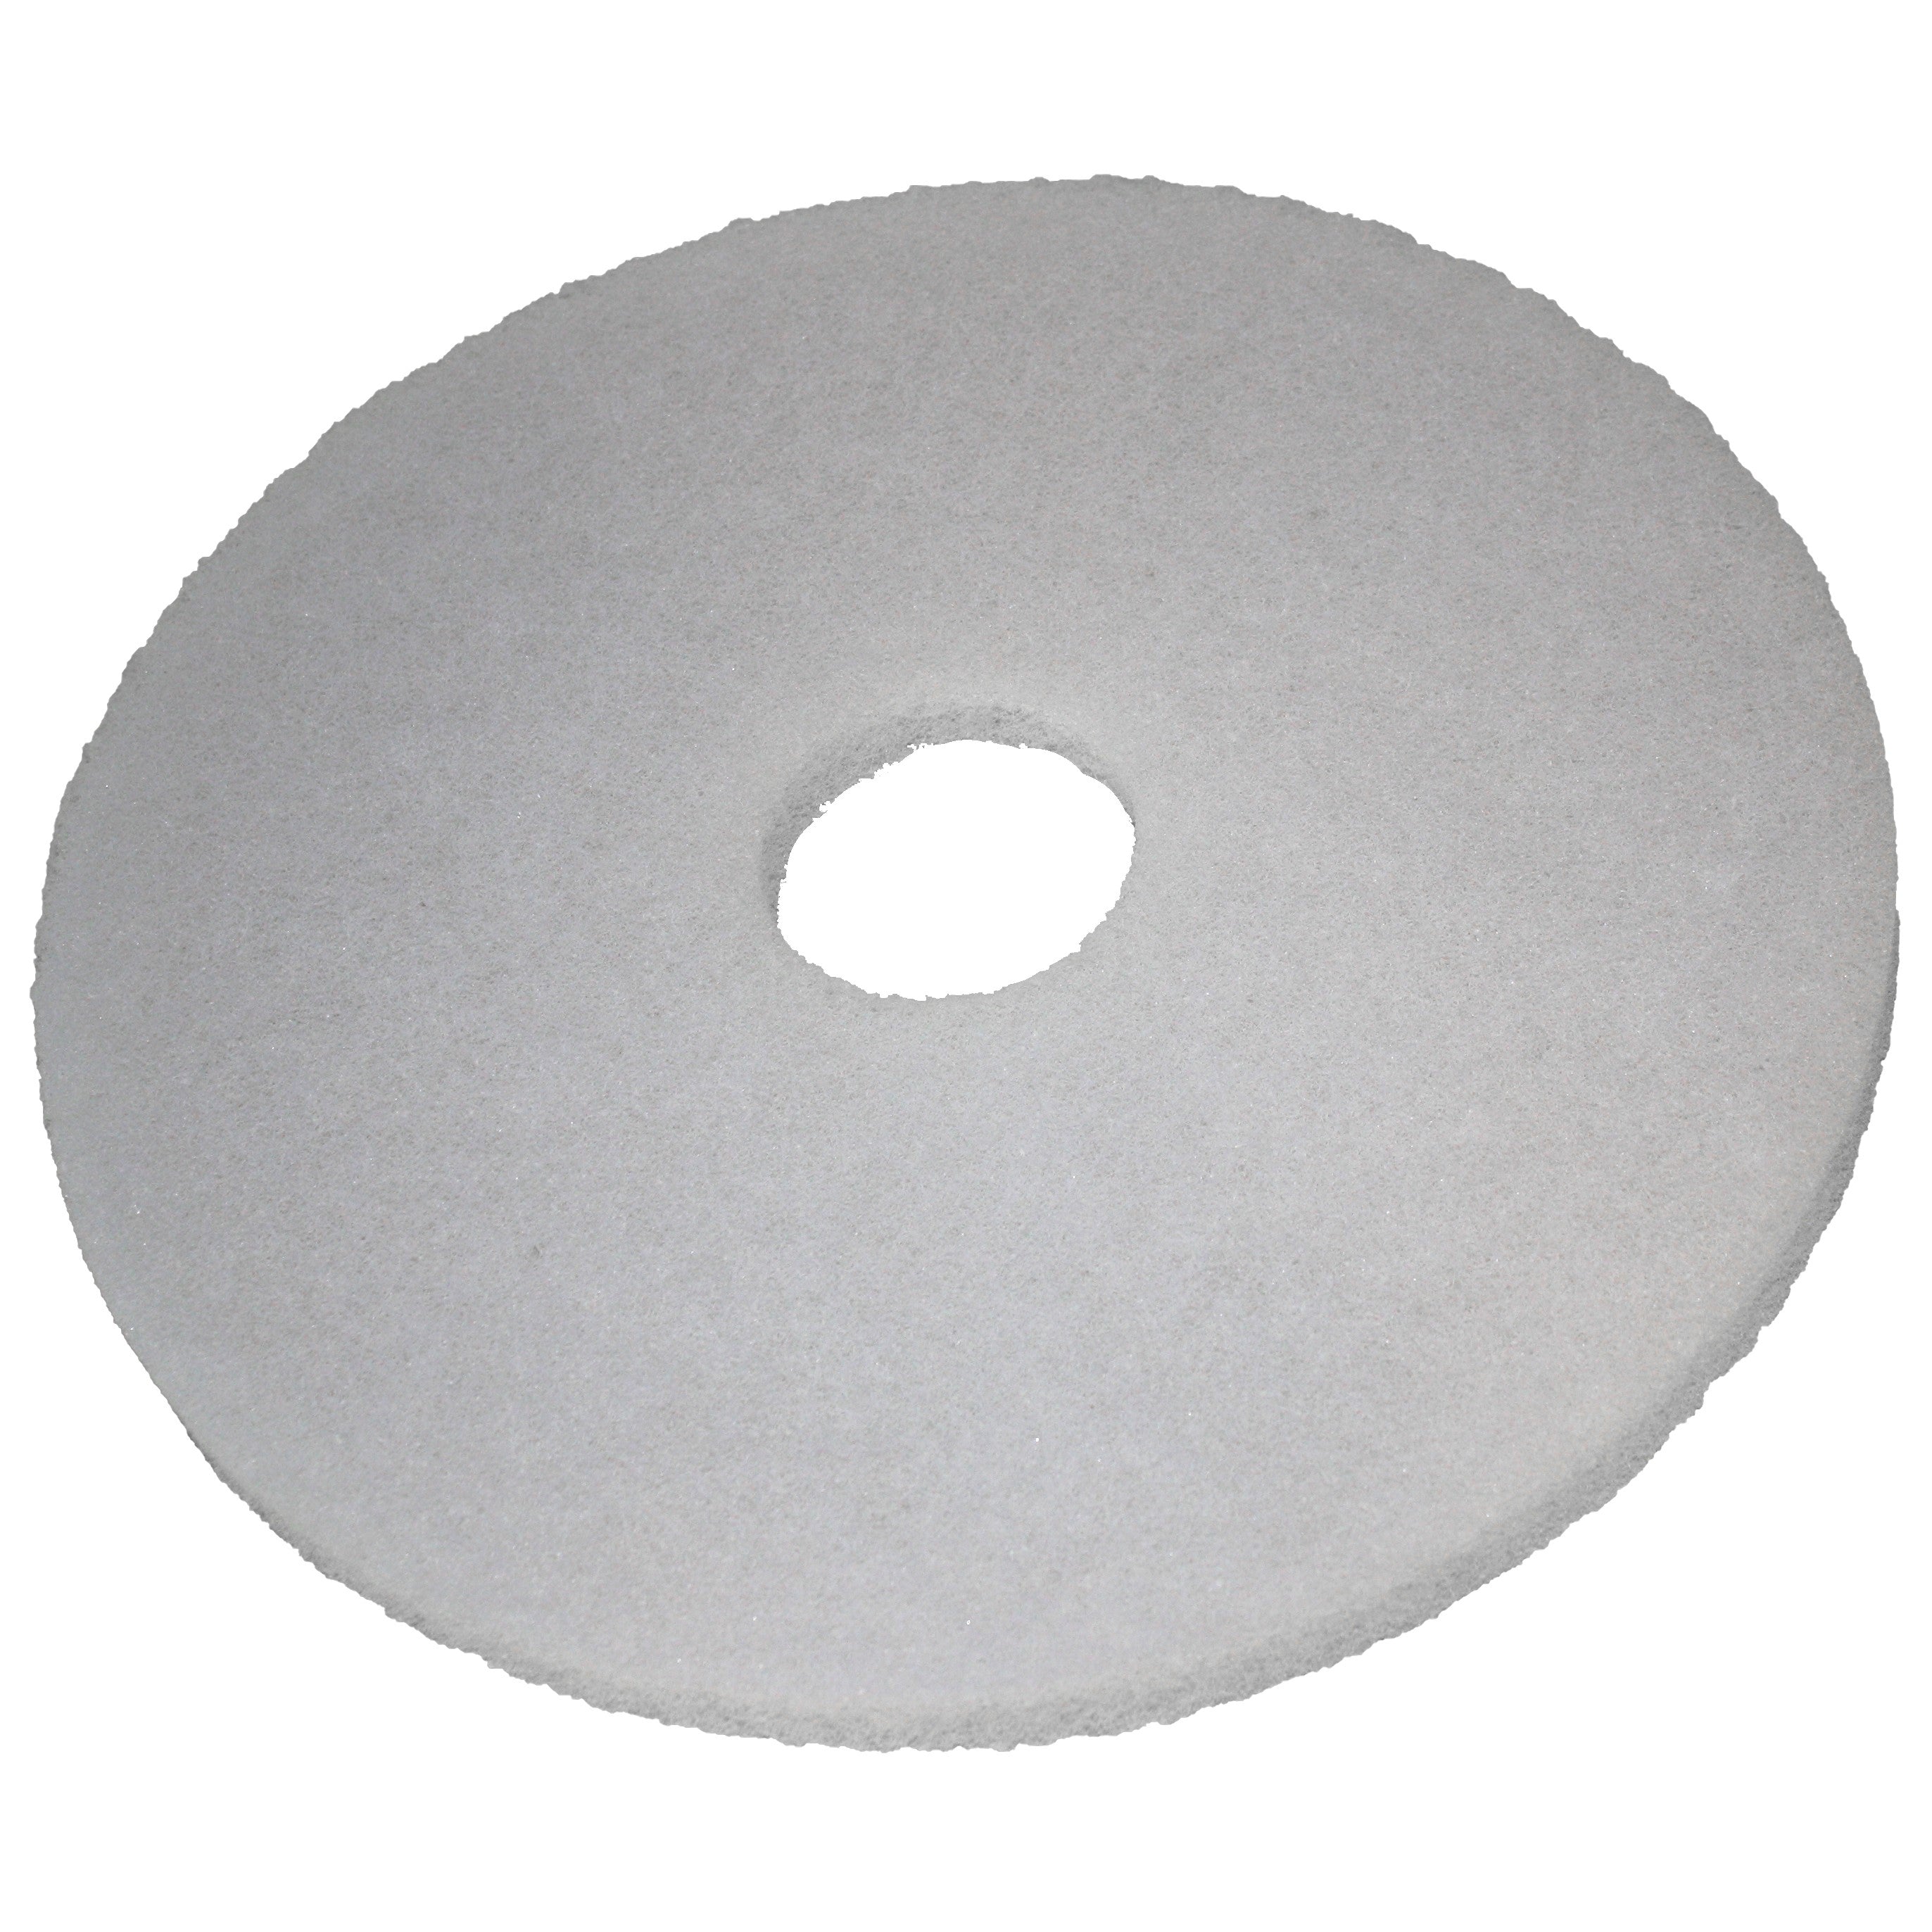 Pad weiss, Ø 406 mm, Polyester